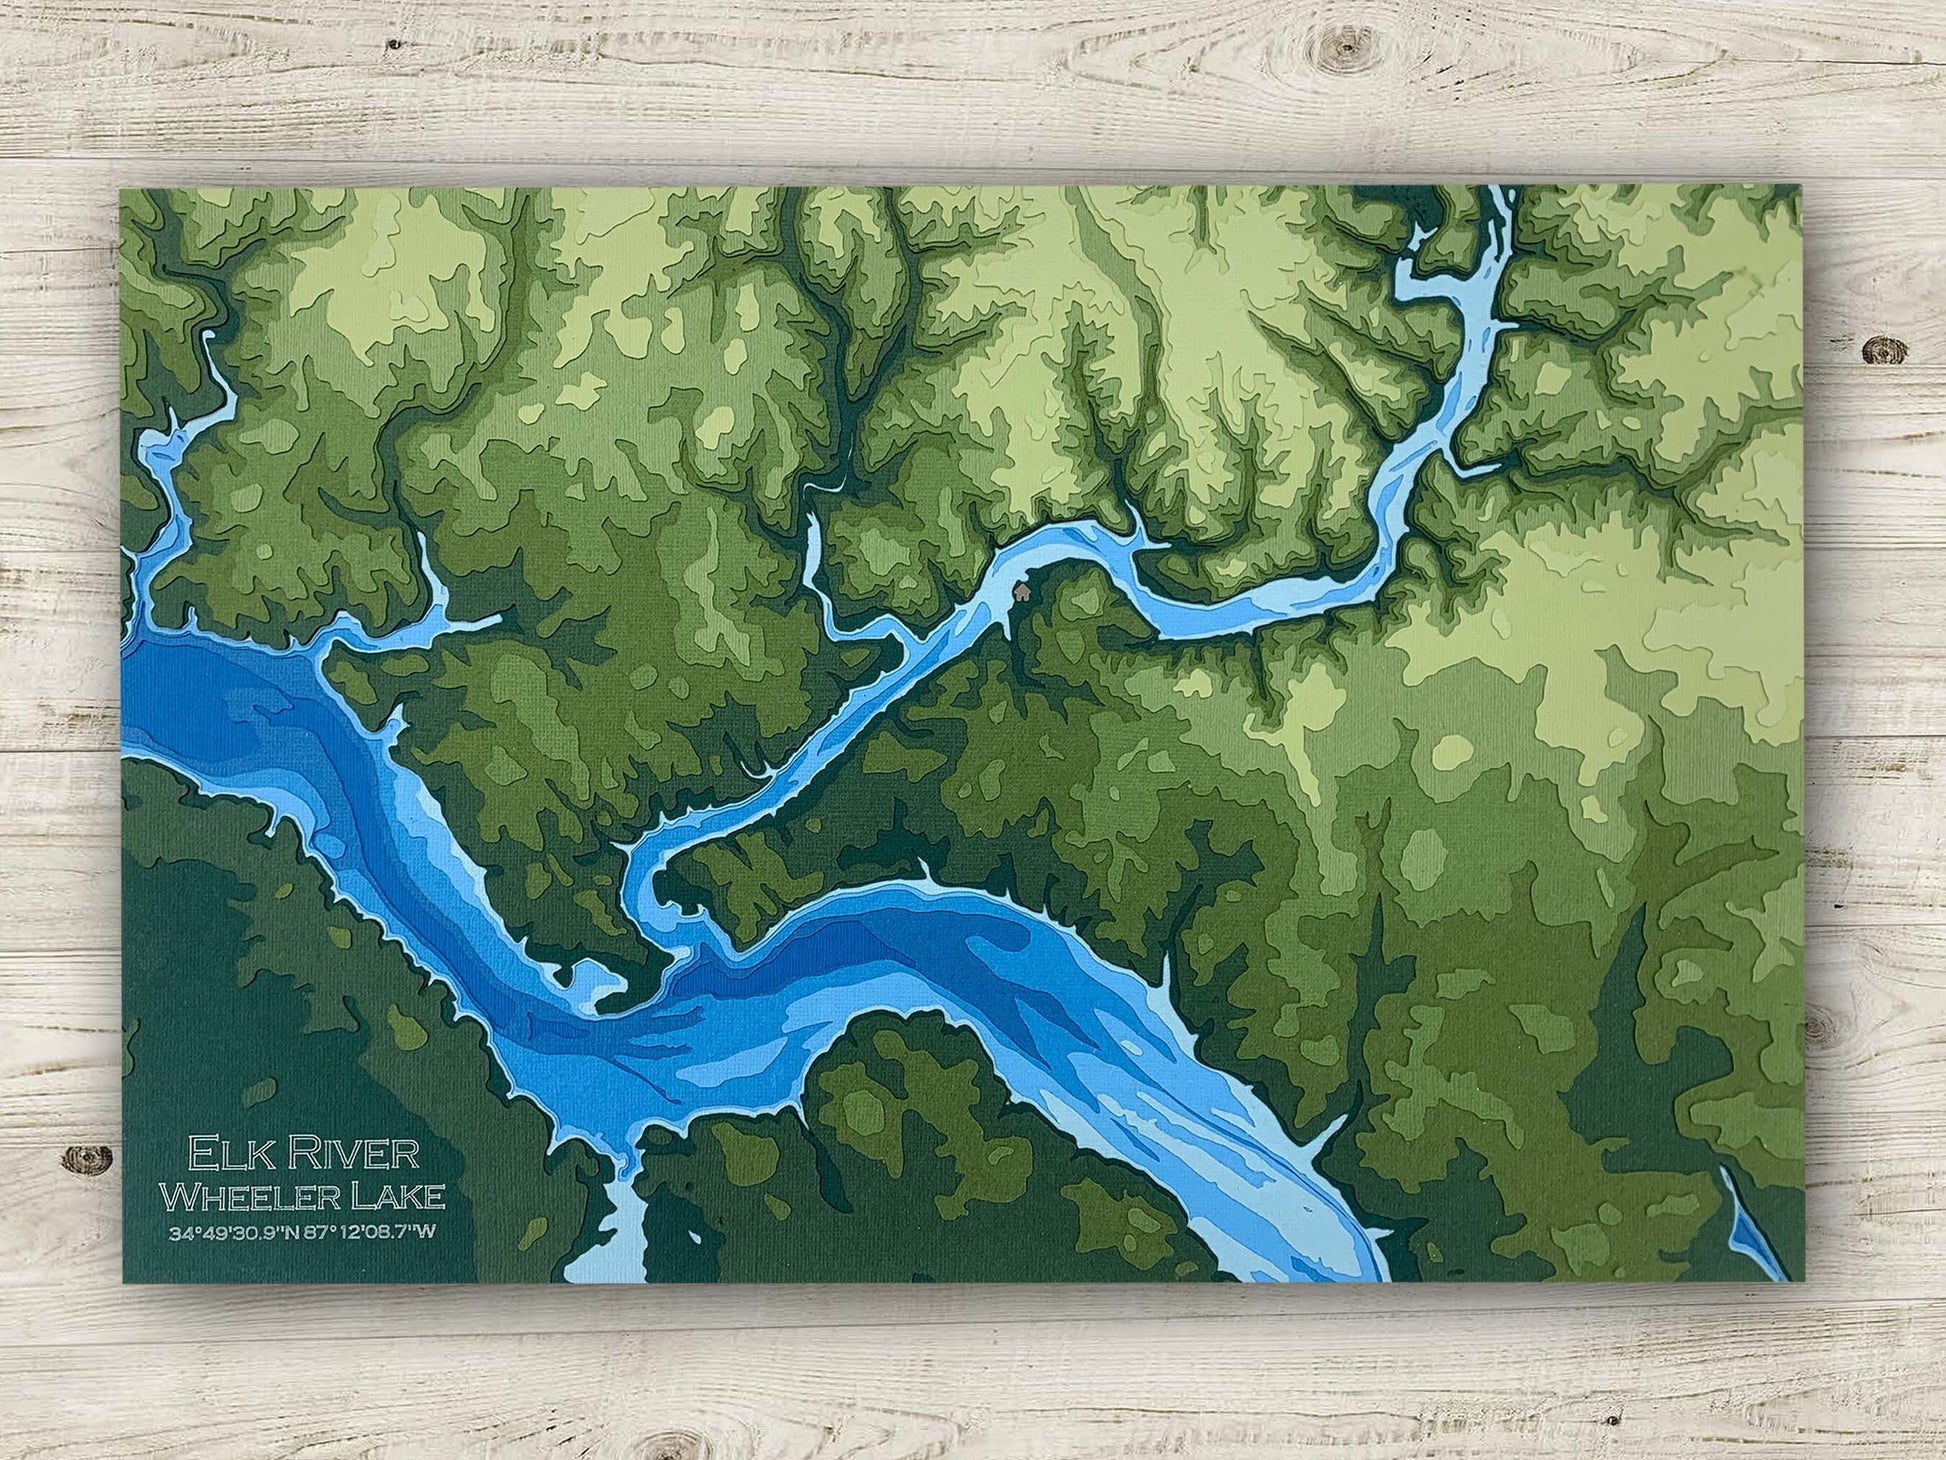 tennessee river map